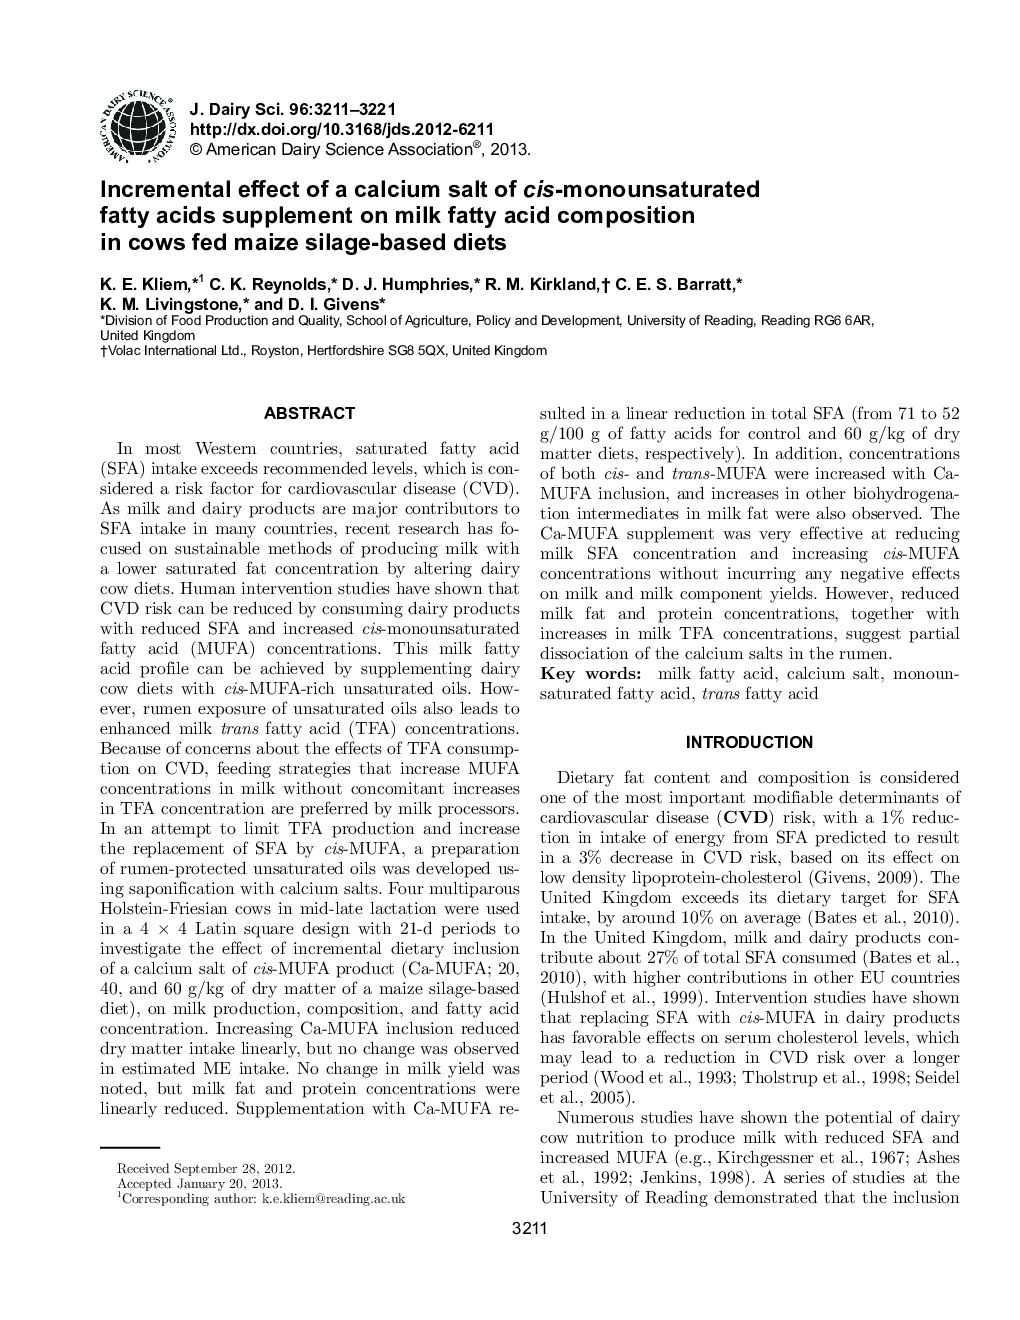 Incremental effect of a calcium salt of cis-monounsaturated fatty acids supplement on milk fatty acid composition in cows fed maize silage-based diets